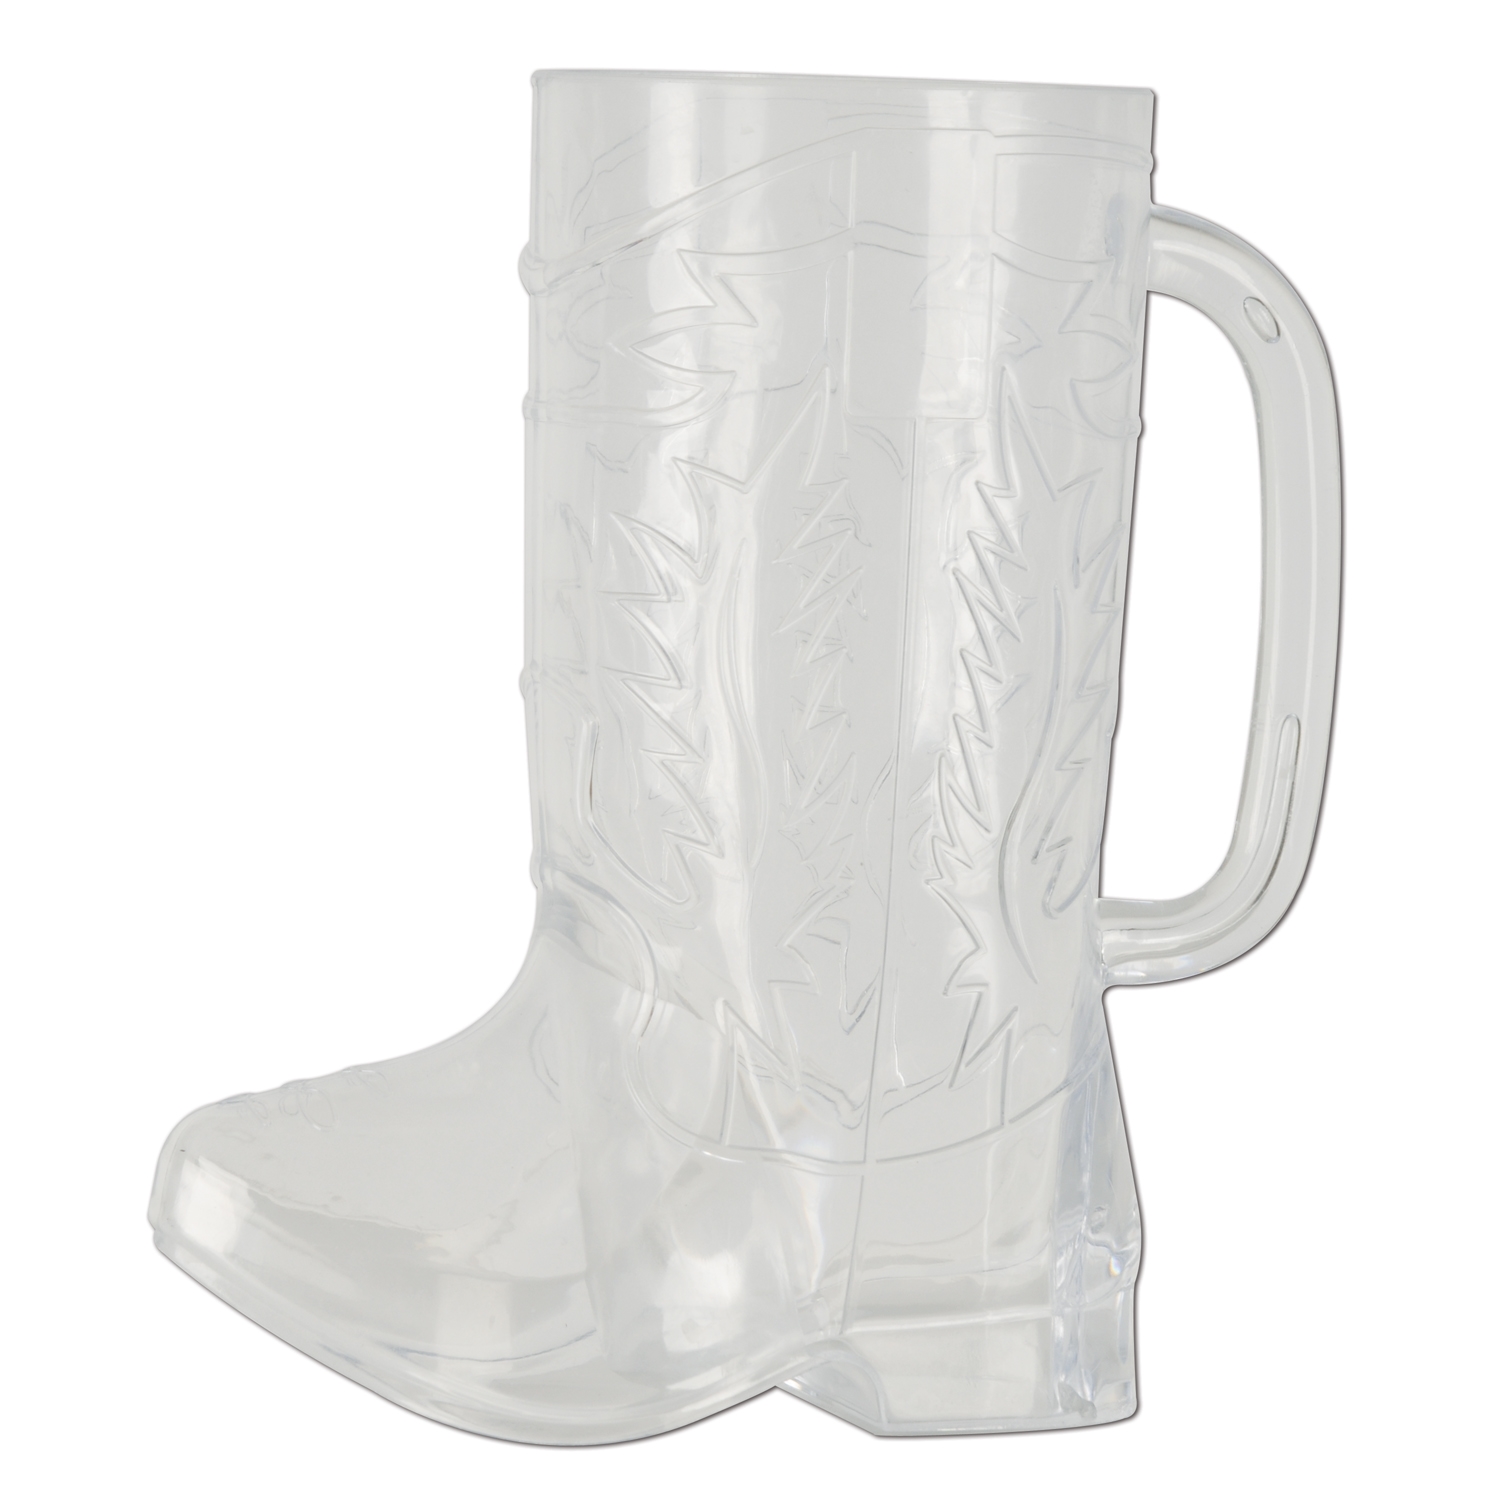 plastic mug in the shape of a cowboy boot